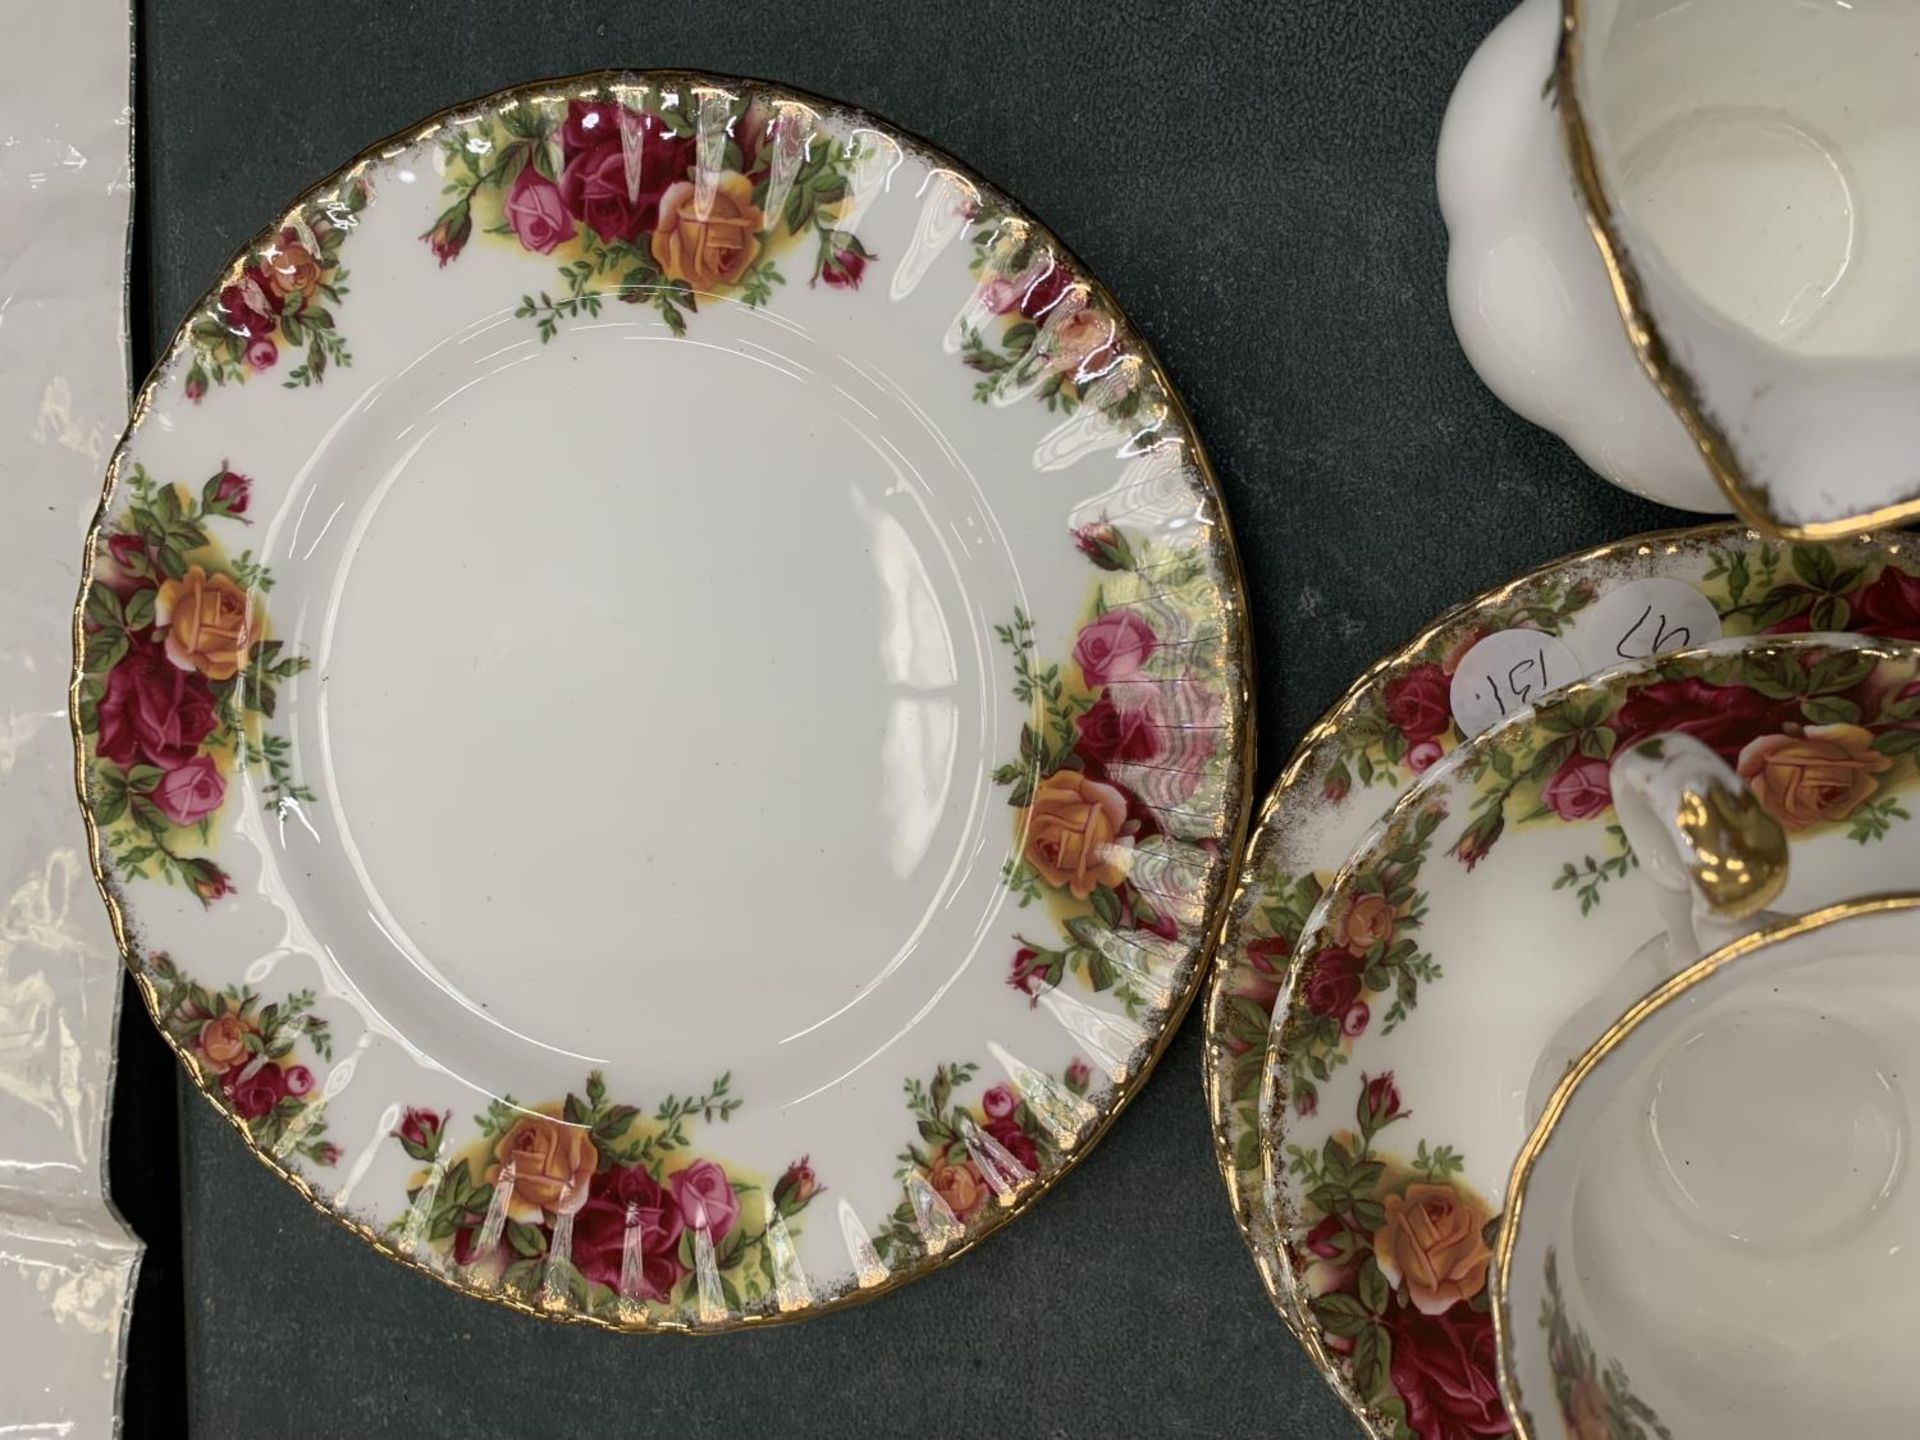 A ROYAL ALBERT 'OLD COUNTRY ROSES' PART TEA SET TO INCLUDE CUPS, SAUCERS, PLATES, A CREAM JUG, SUGAR - Image 4 of 5